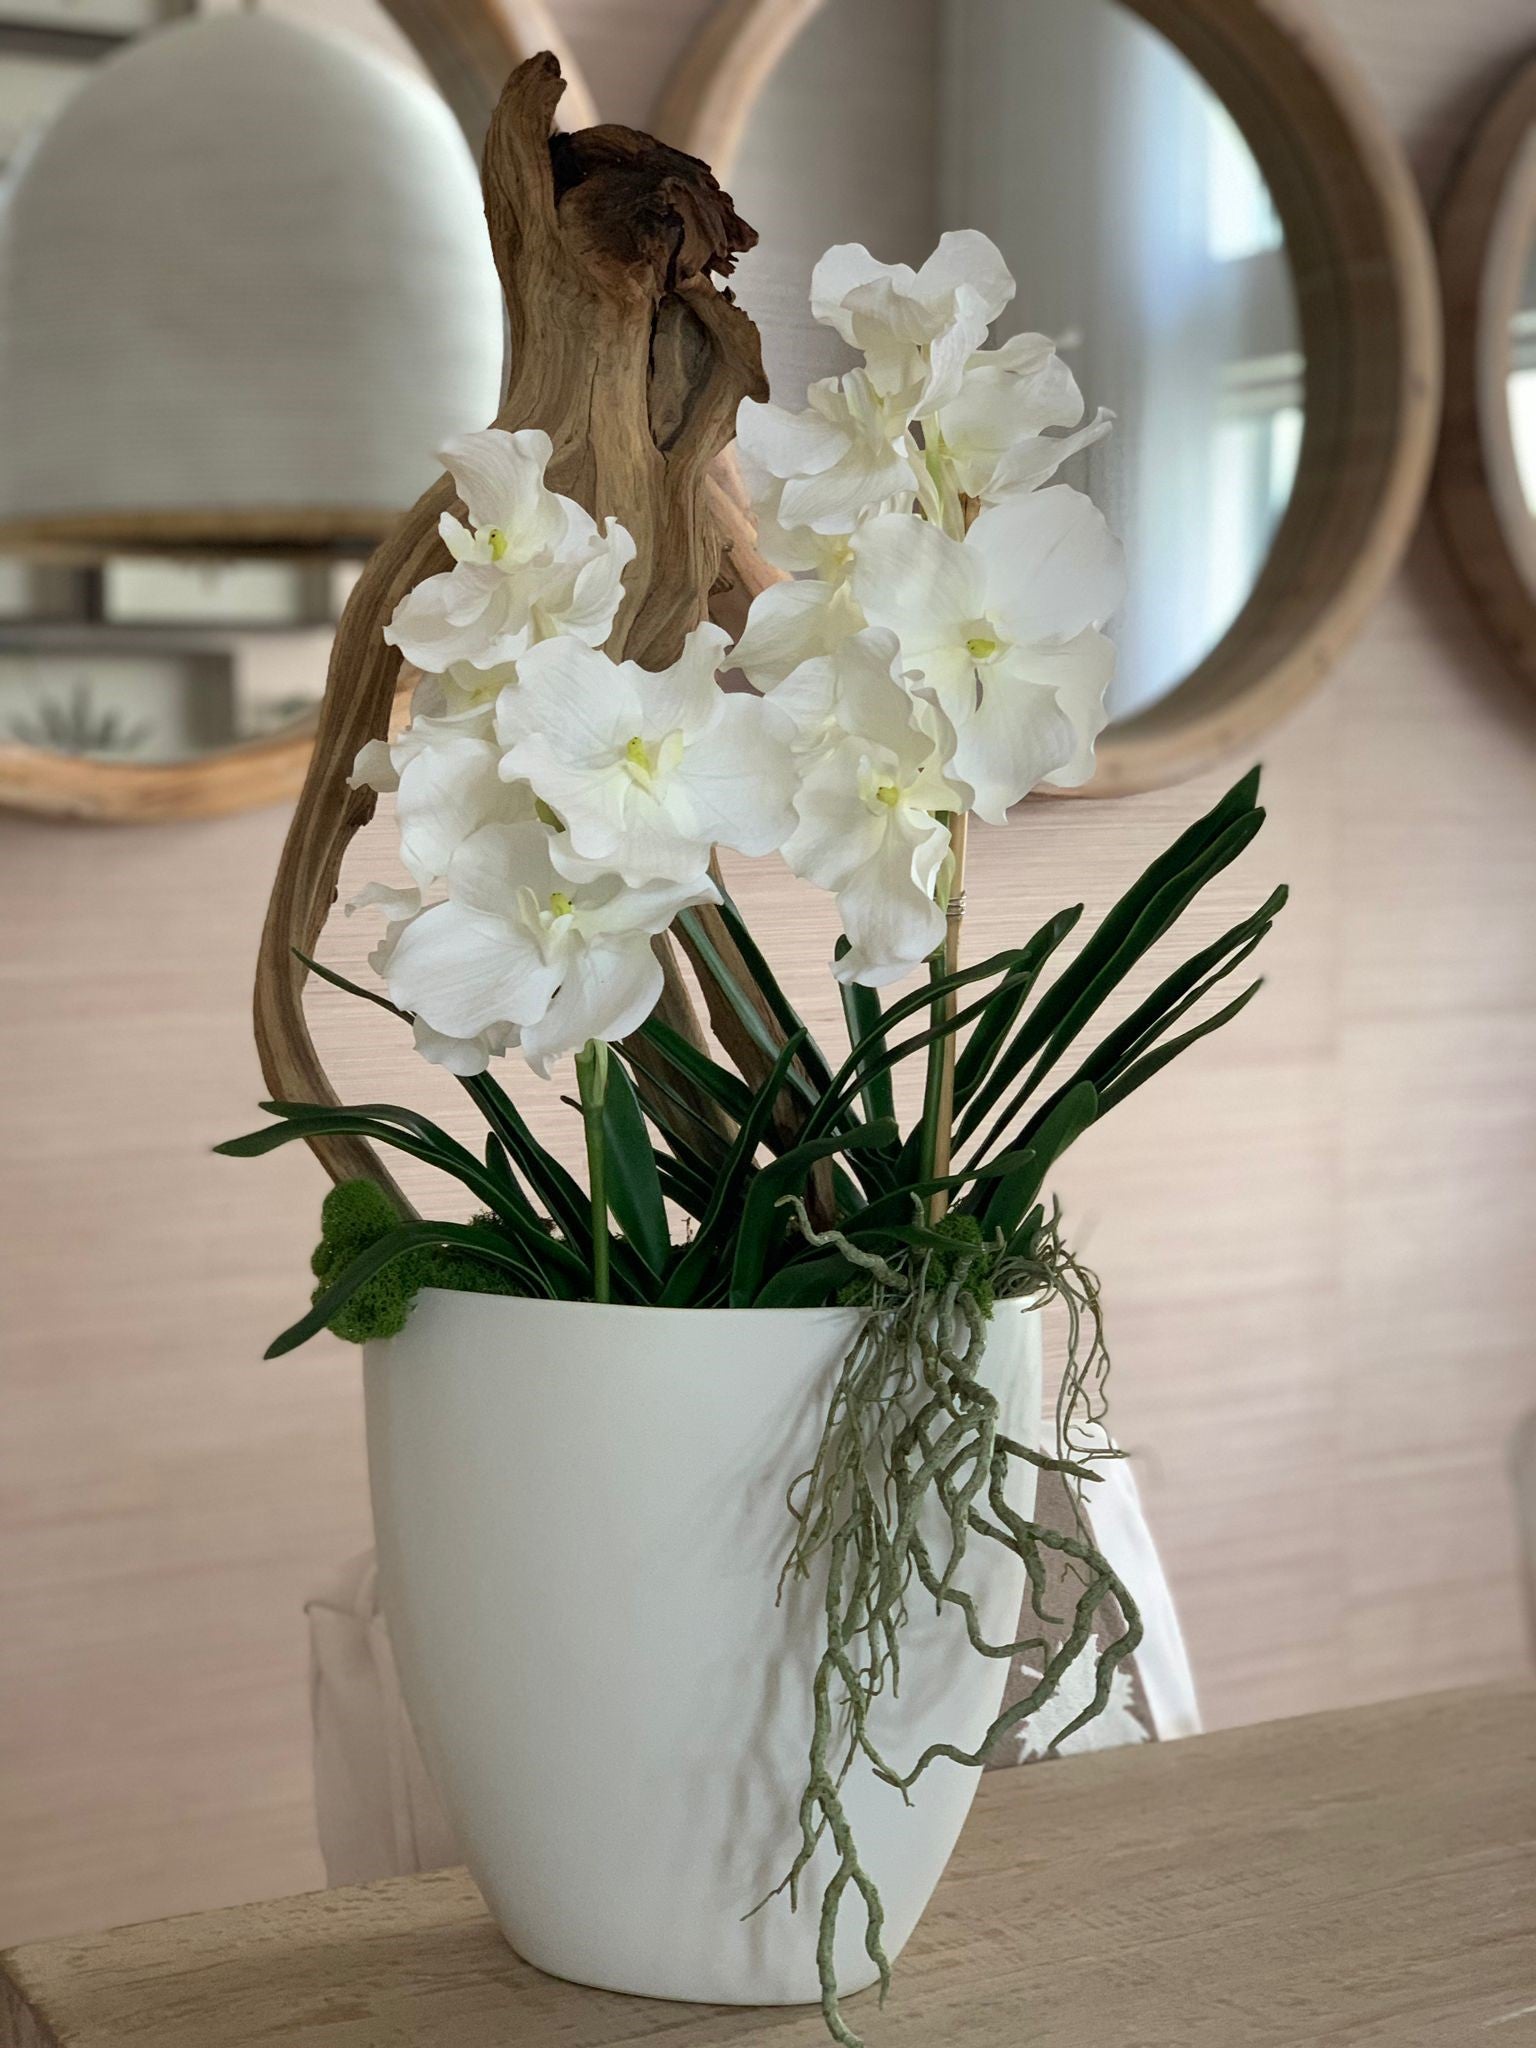 White Vanda Orchids and Ghost Wood set in a white Ceramic Vase – Matarazzo  Floral Designs